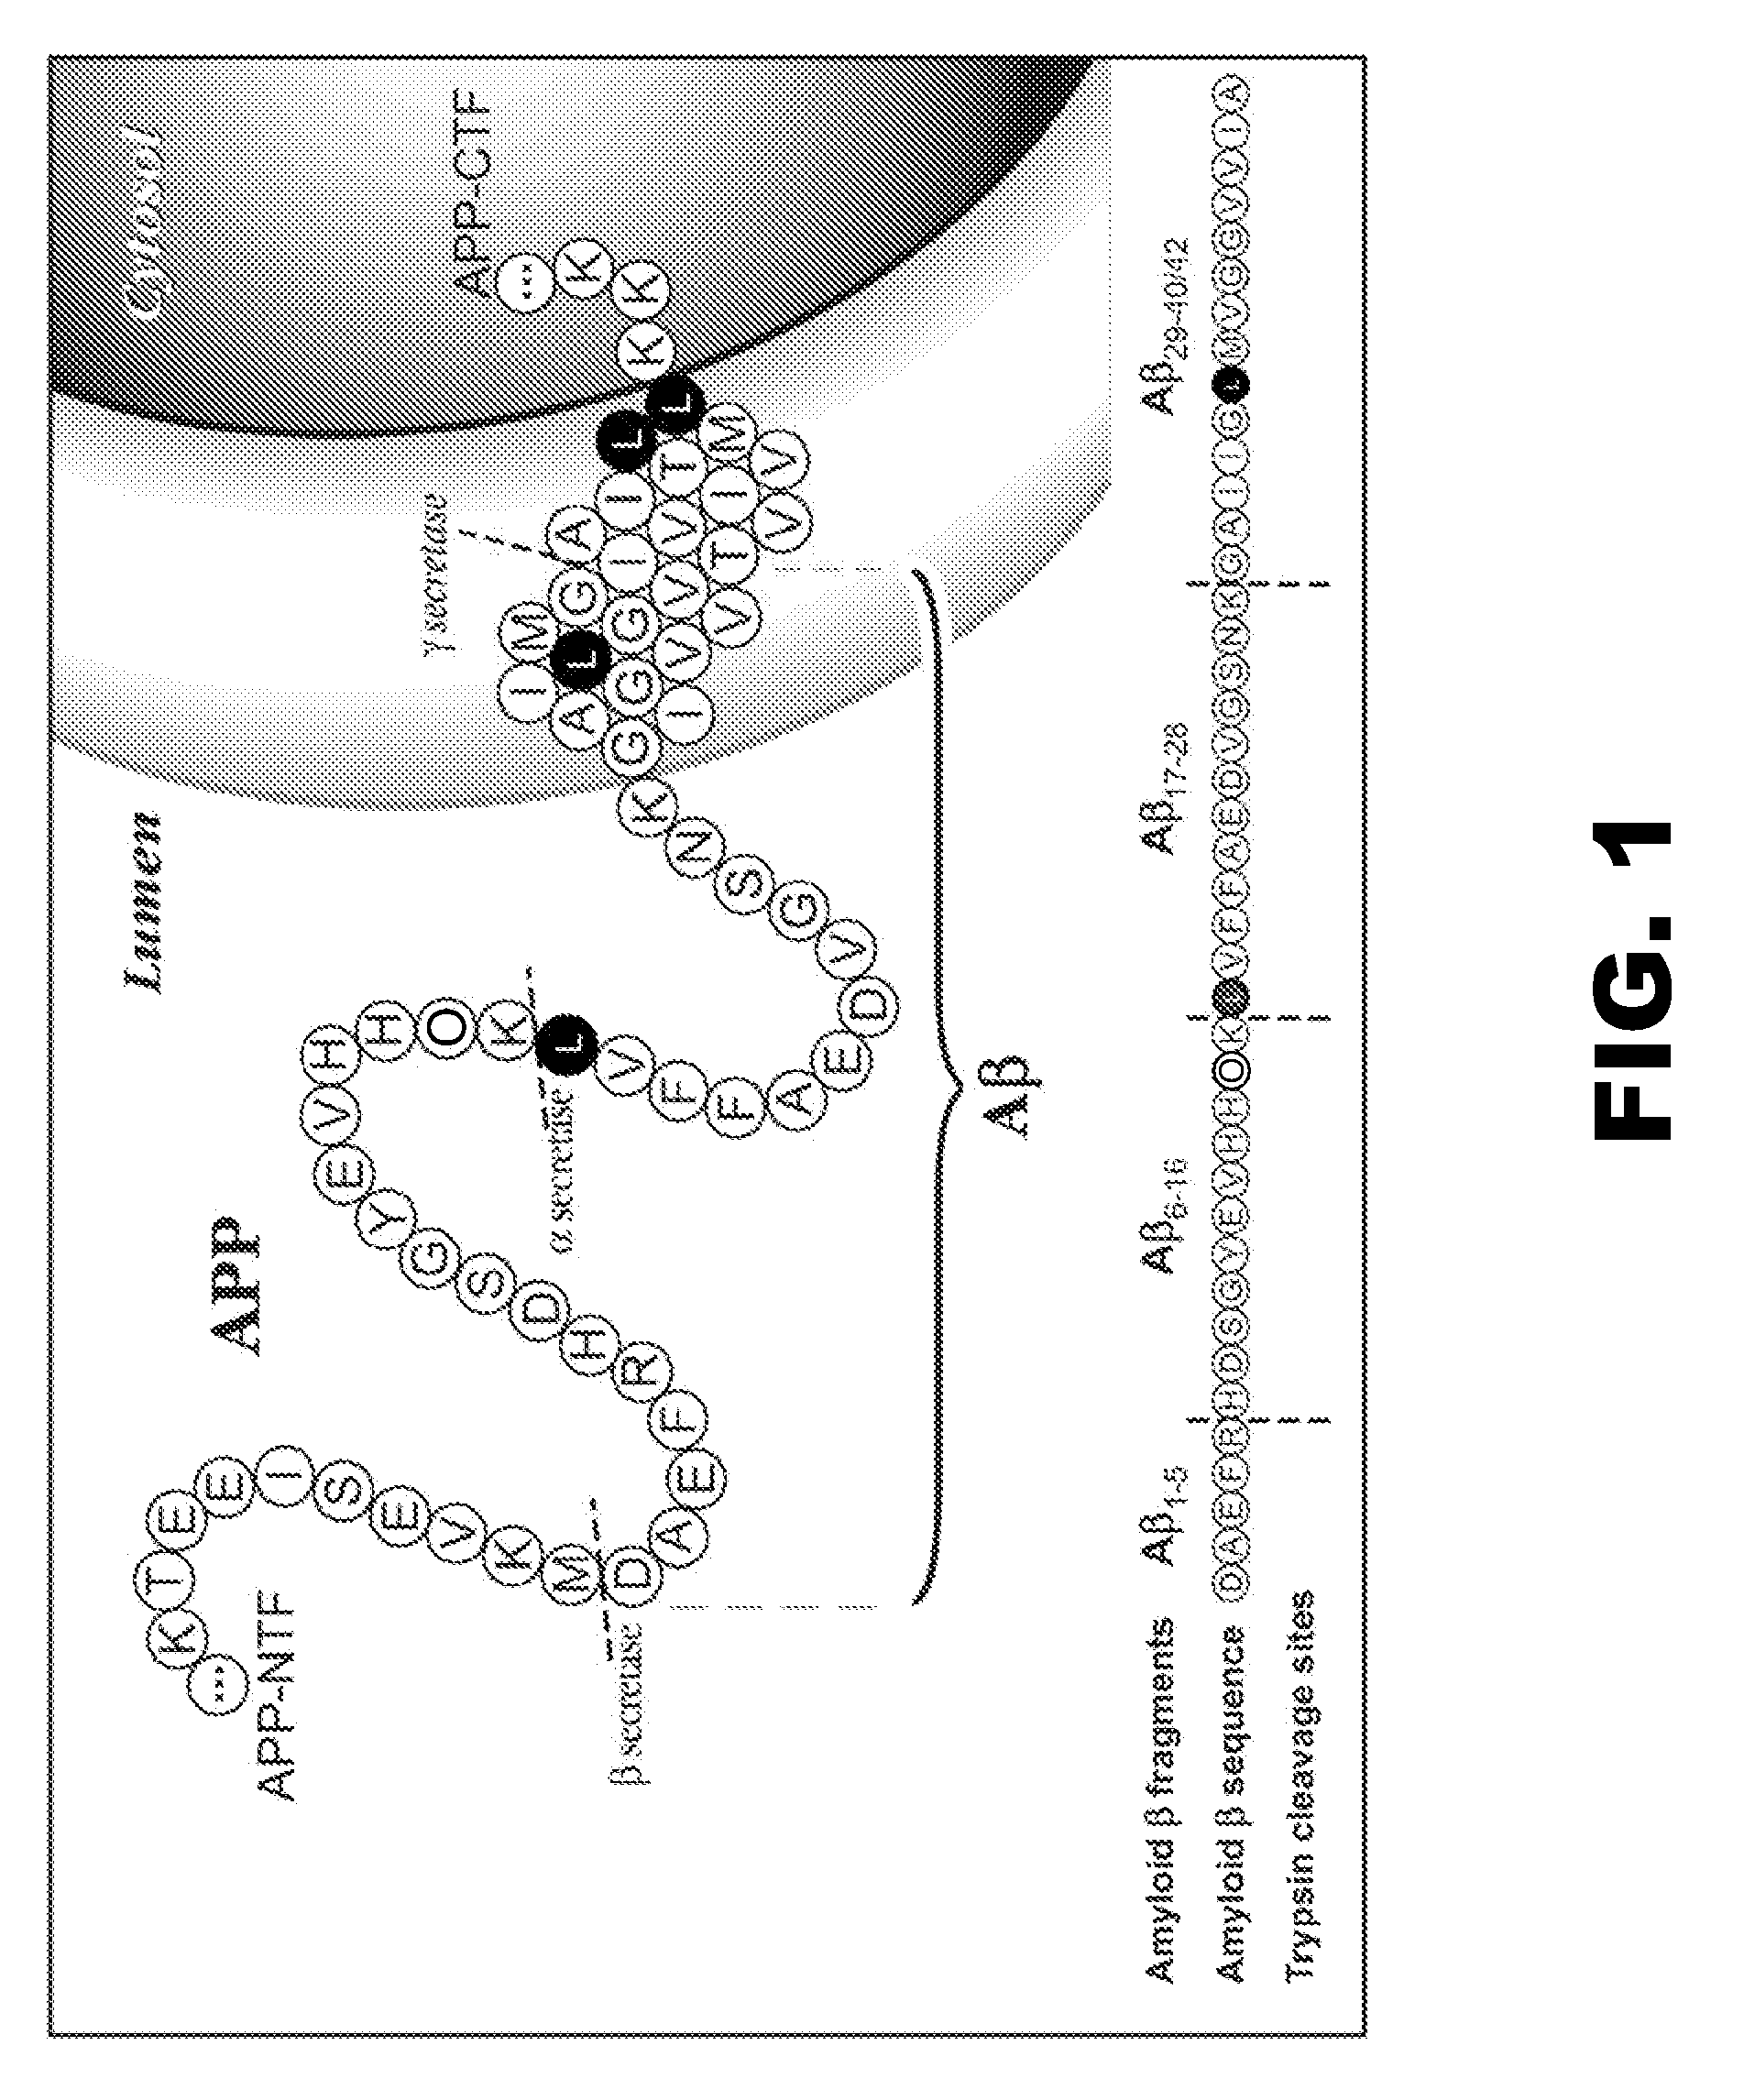 Methods for measuring the metabolism of CNS derived biomolecules in vivo